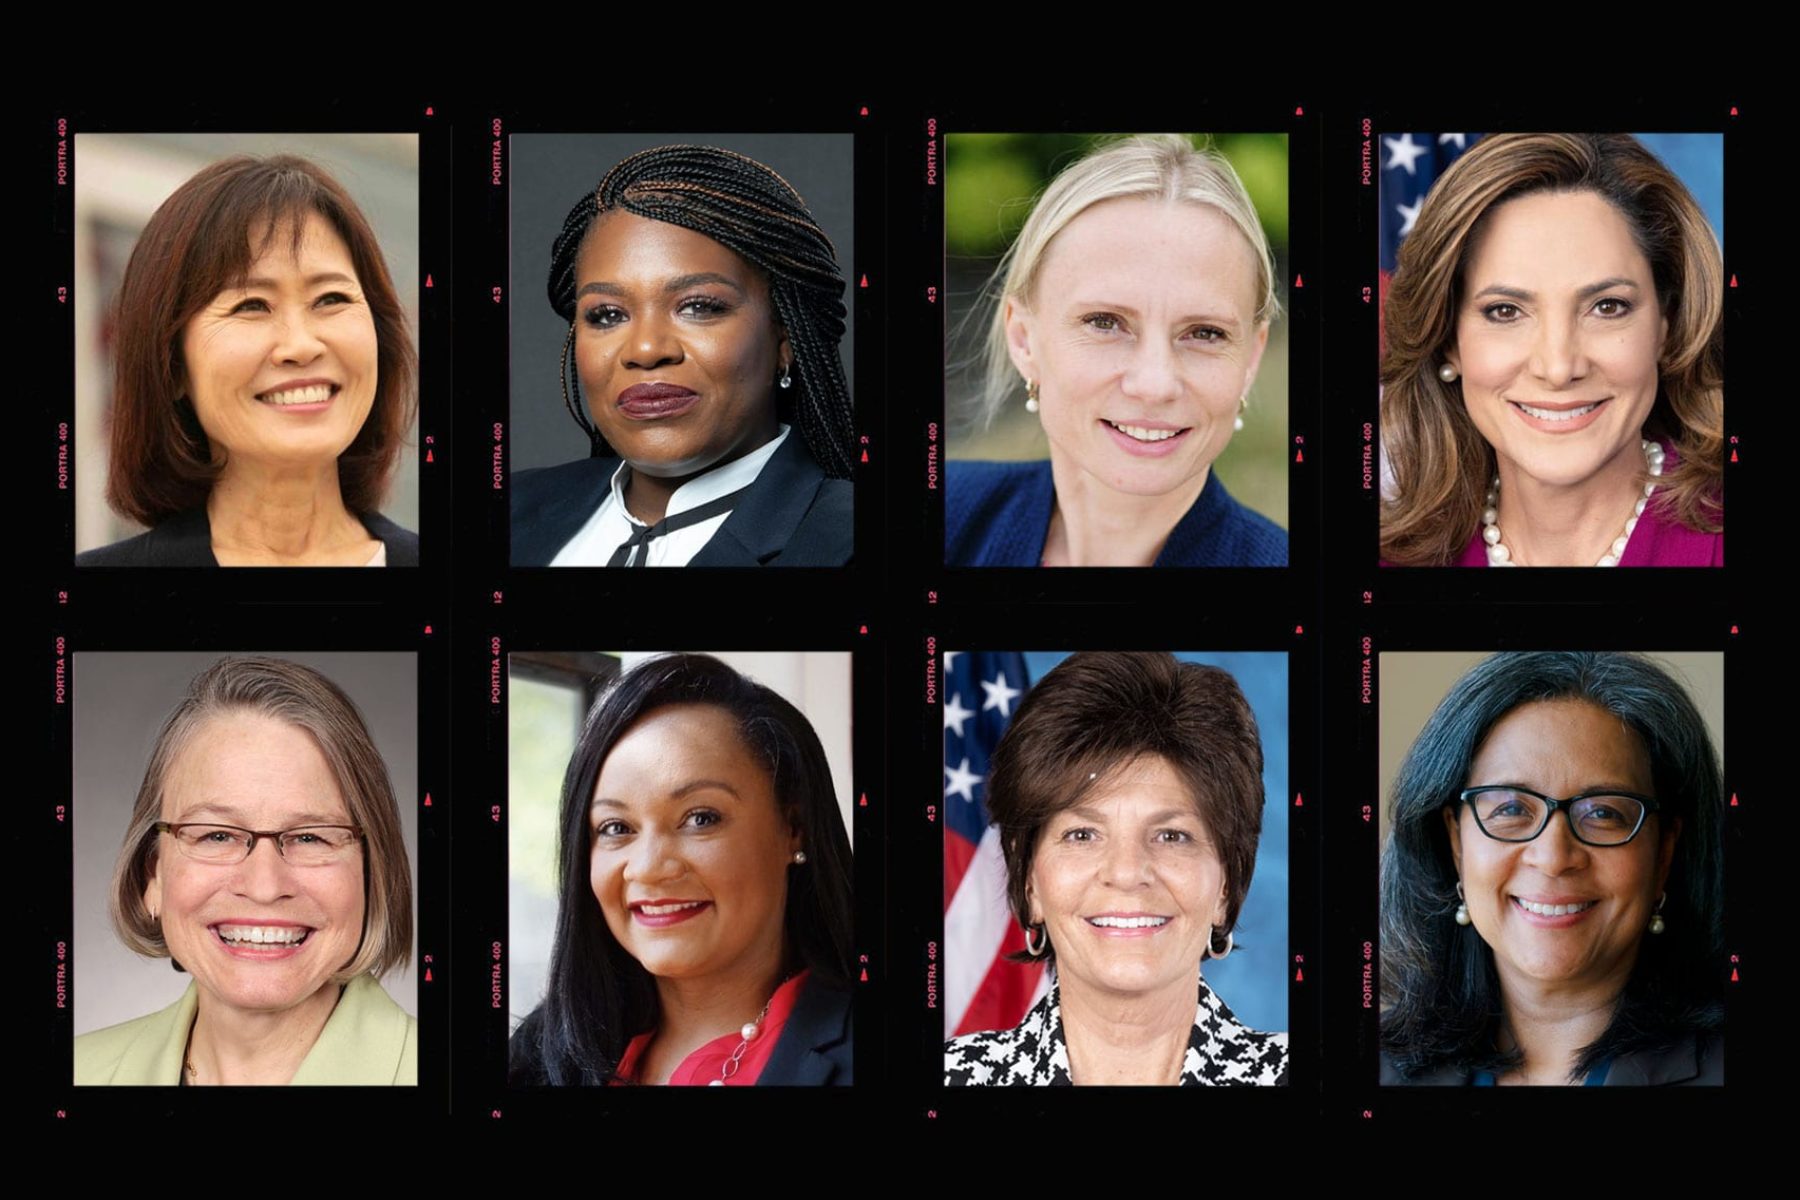 Meet the new women in the House of Representatives